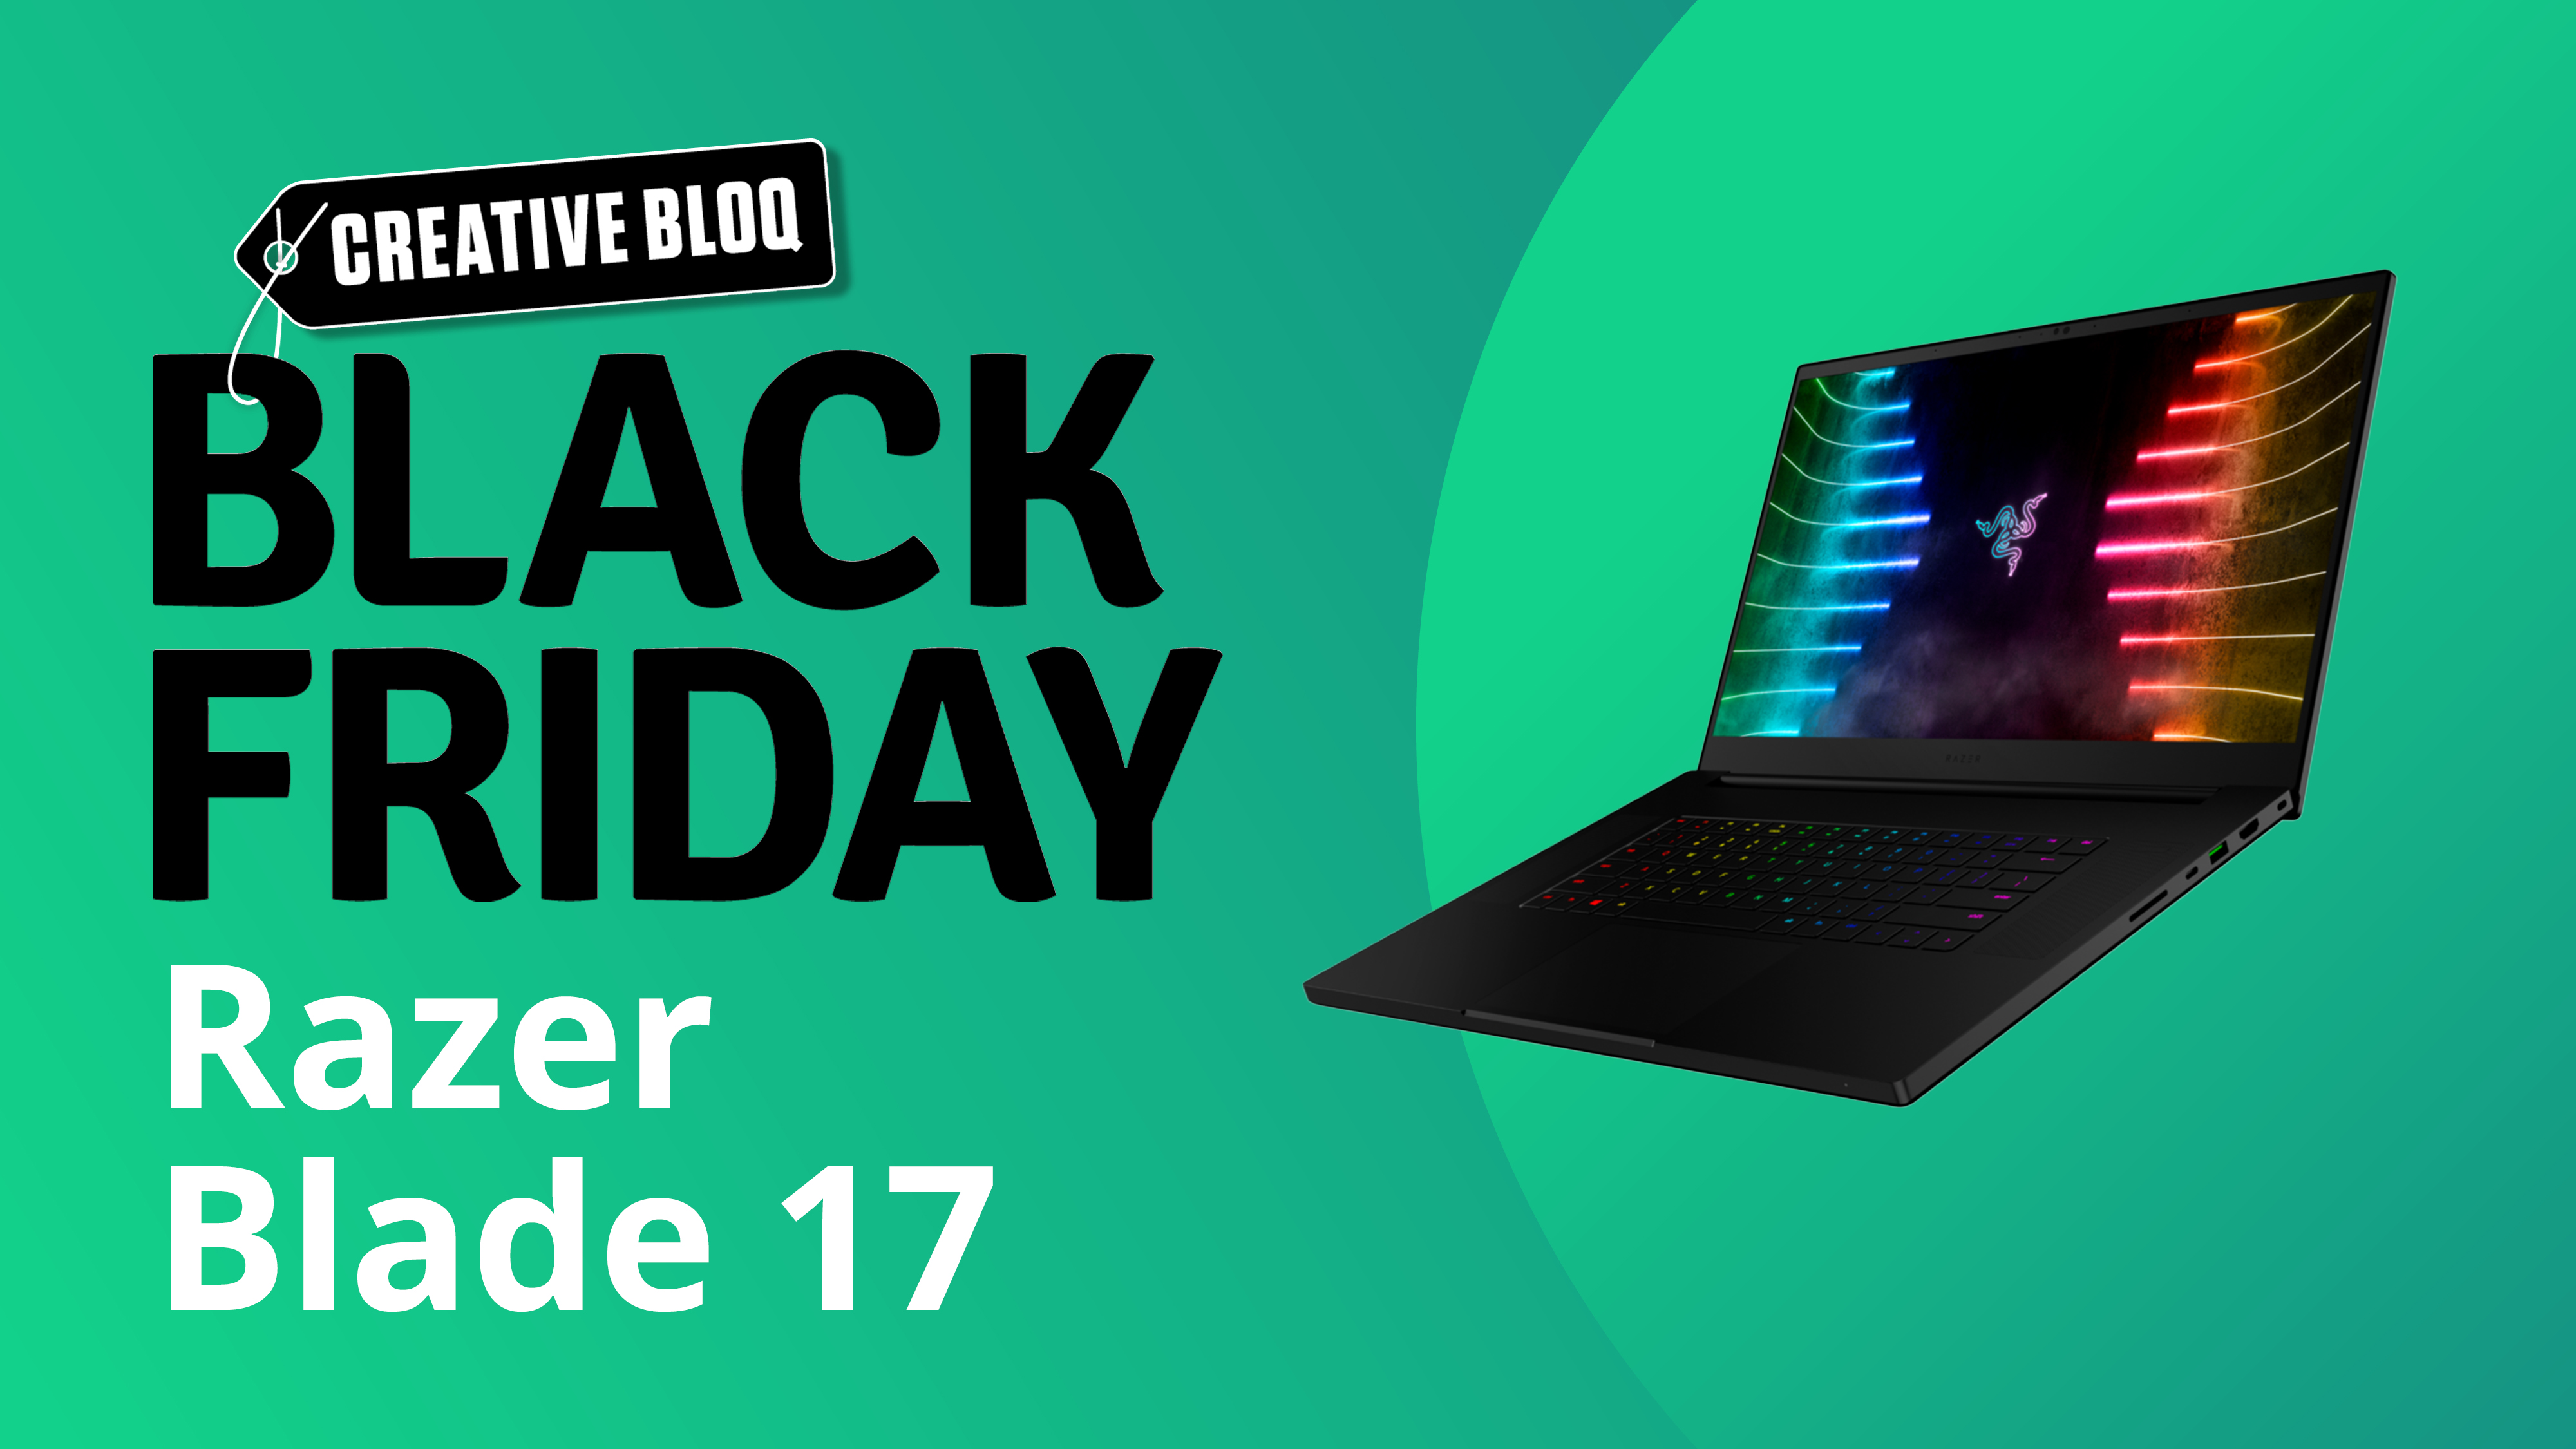 Image of a Razer Black Friday deal with the Razer Blade 17 on a green background